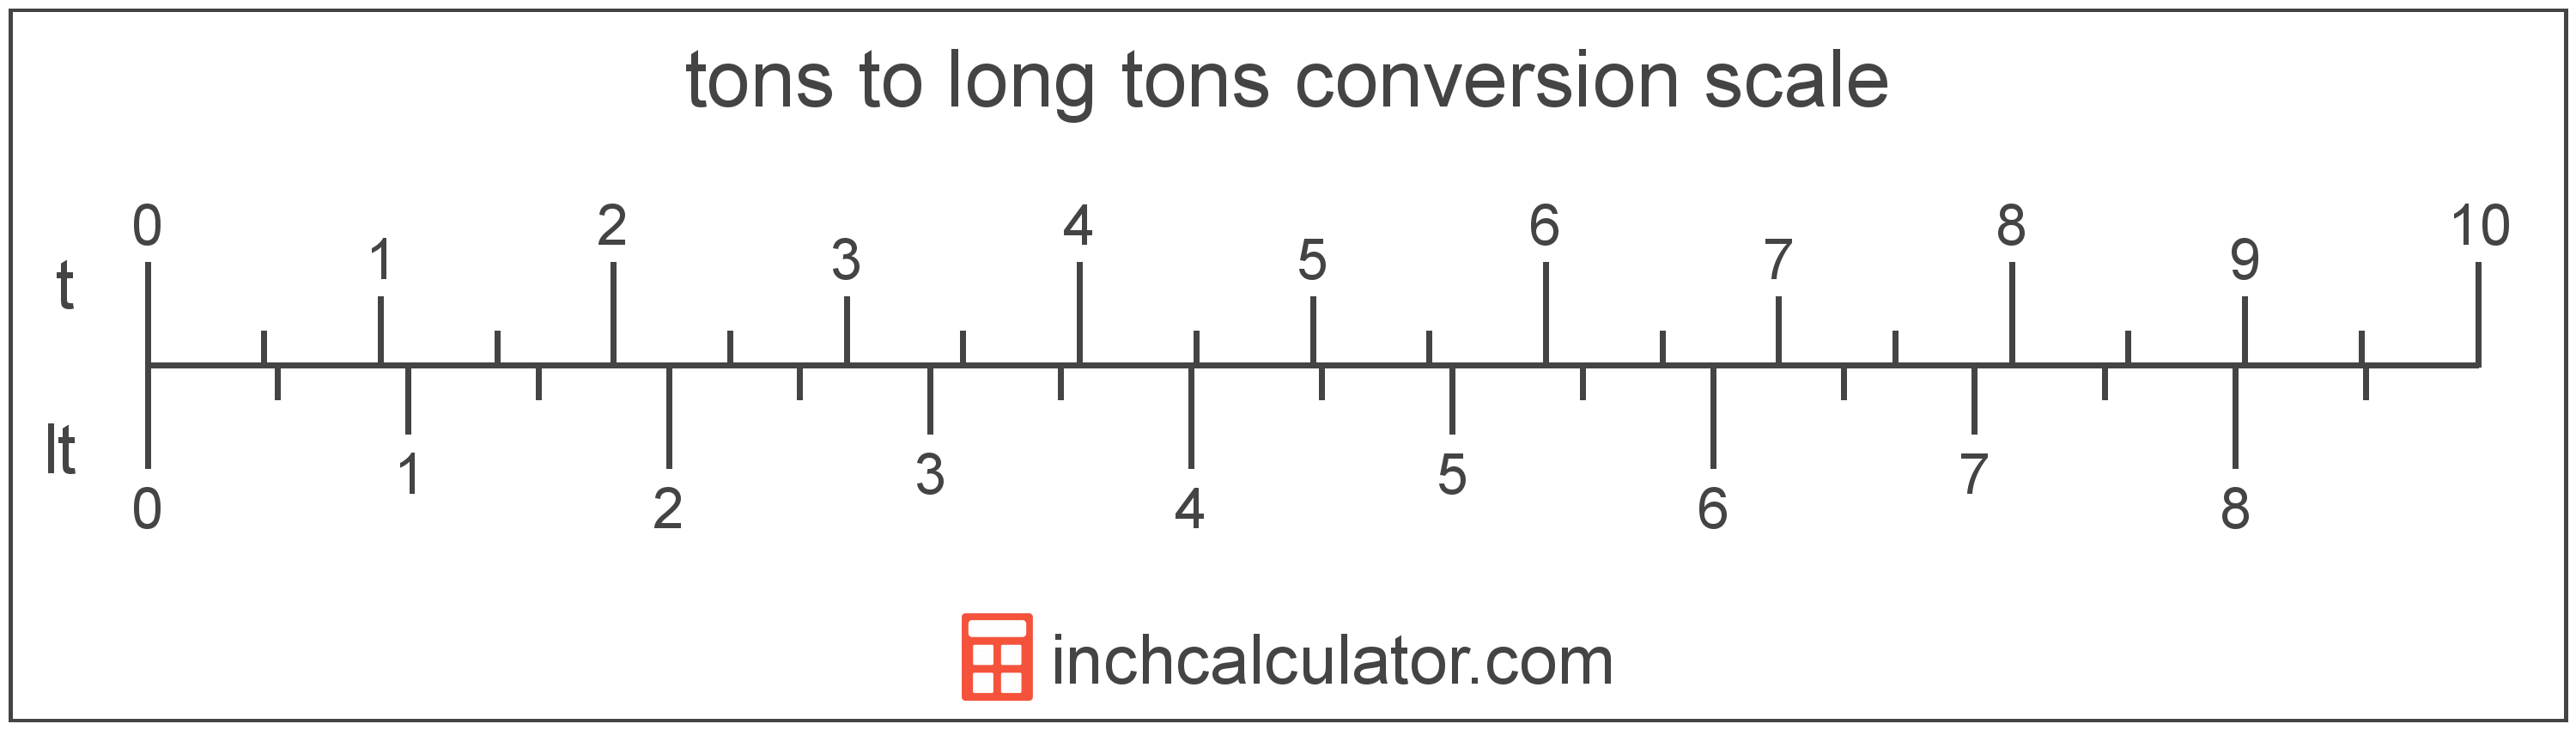 conversion scale showing long tons and equivalent tons weight values